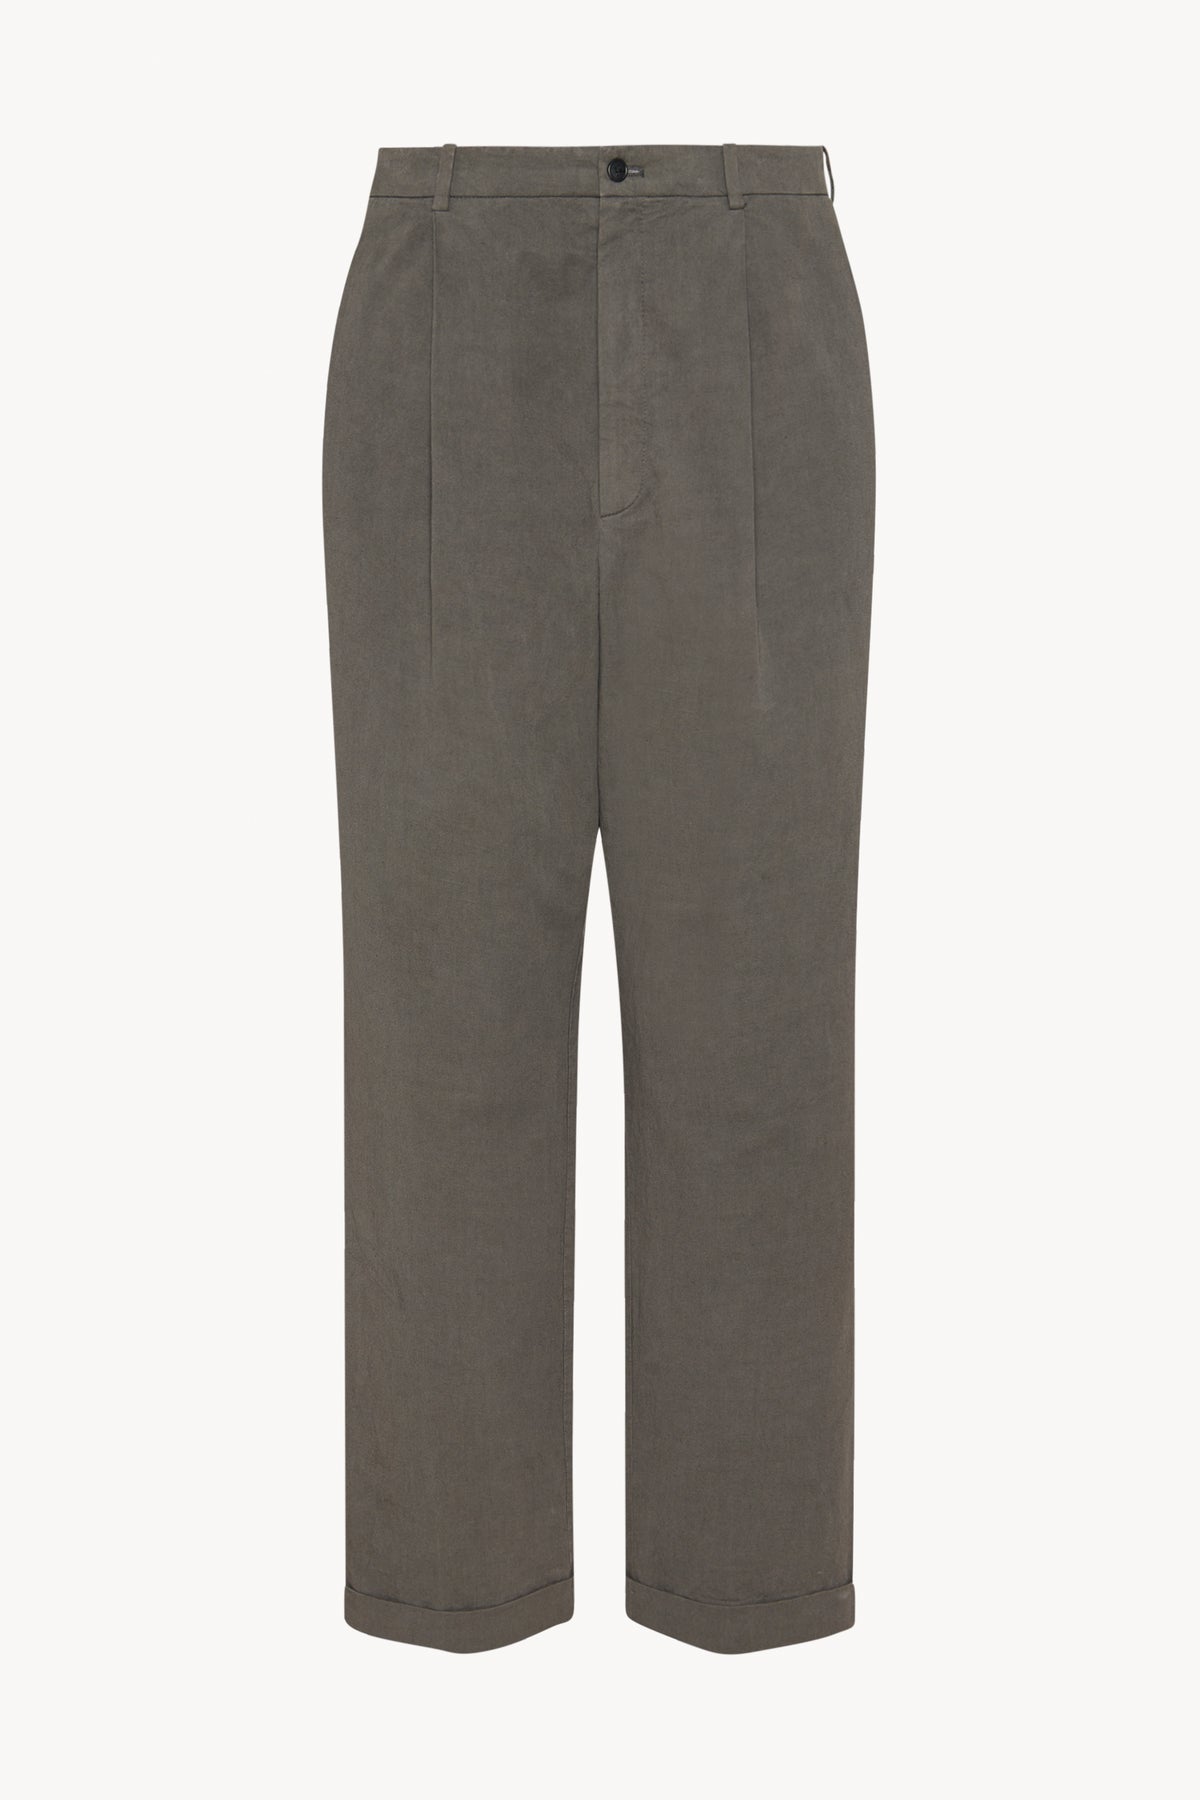 Keenan Pant in Cotton and Linen